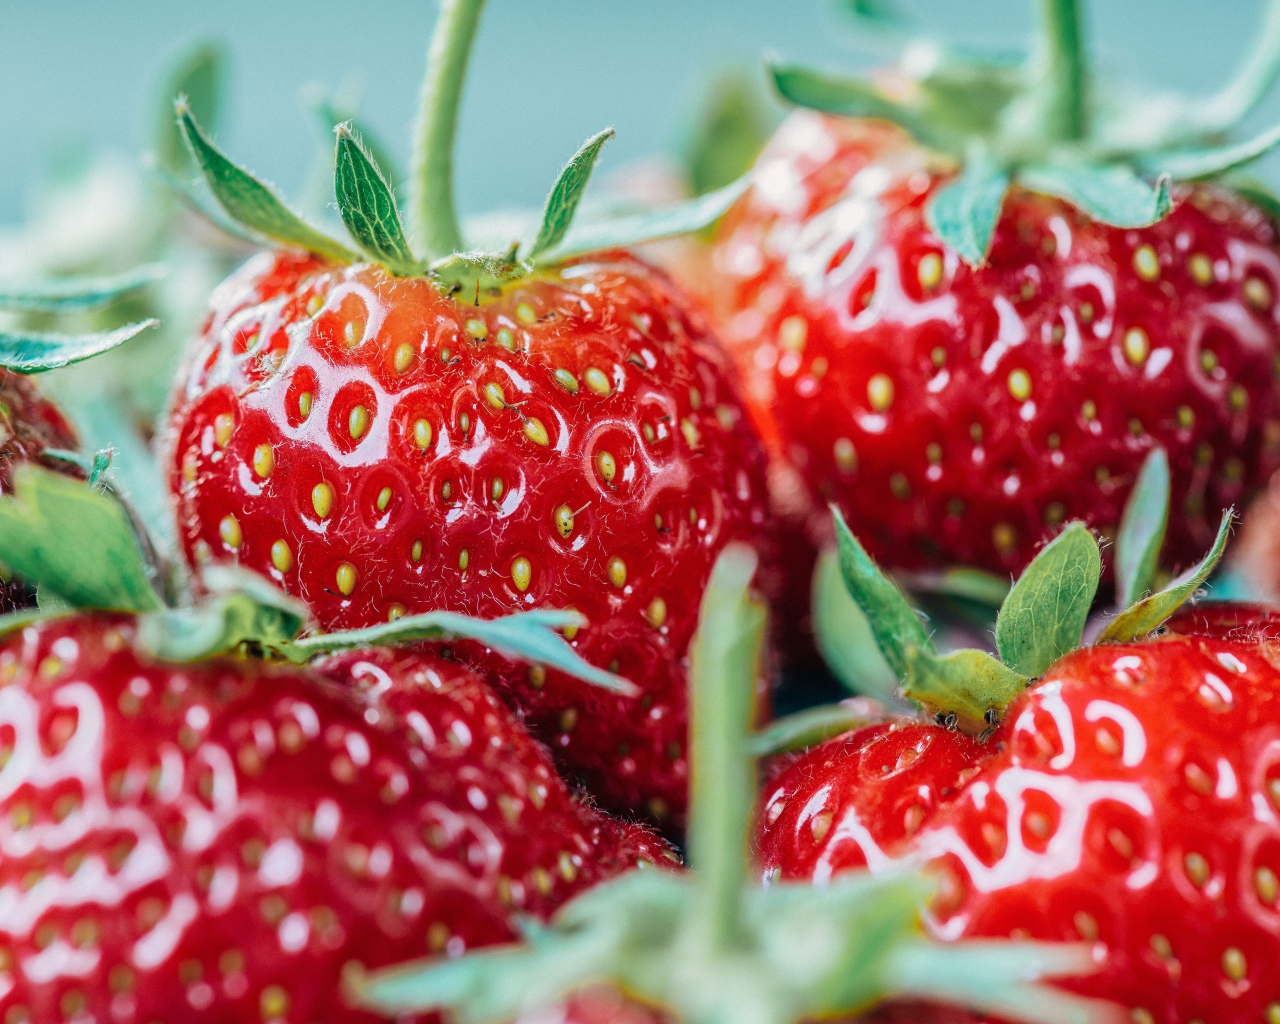 Ripe strawberries with green tails